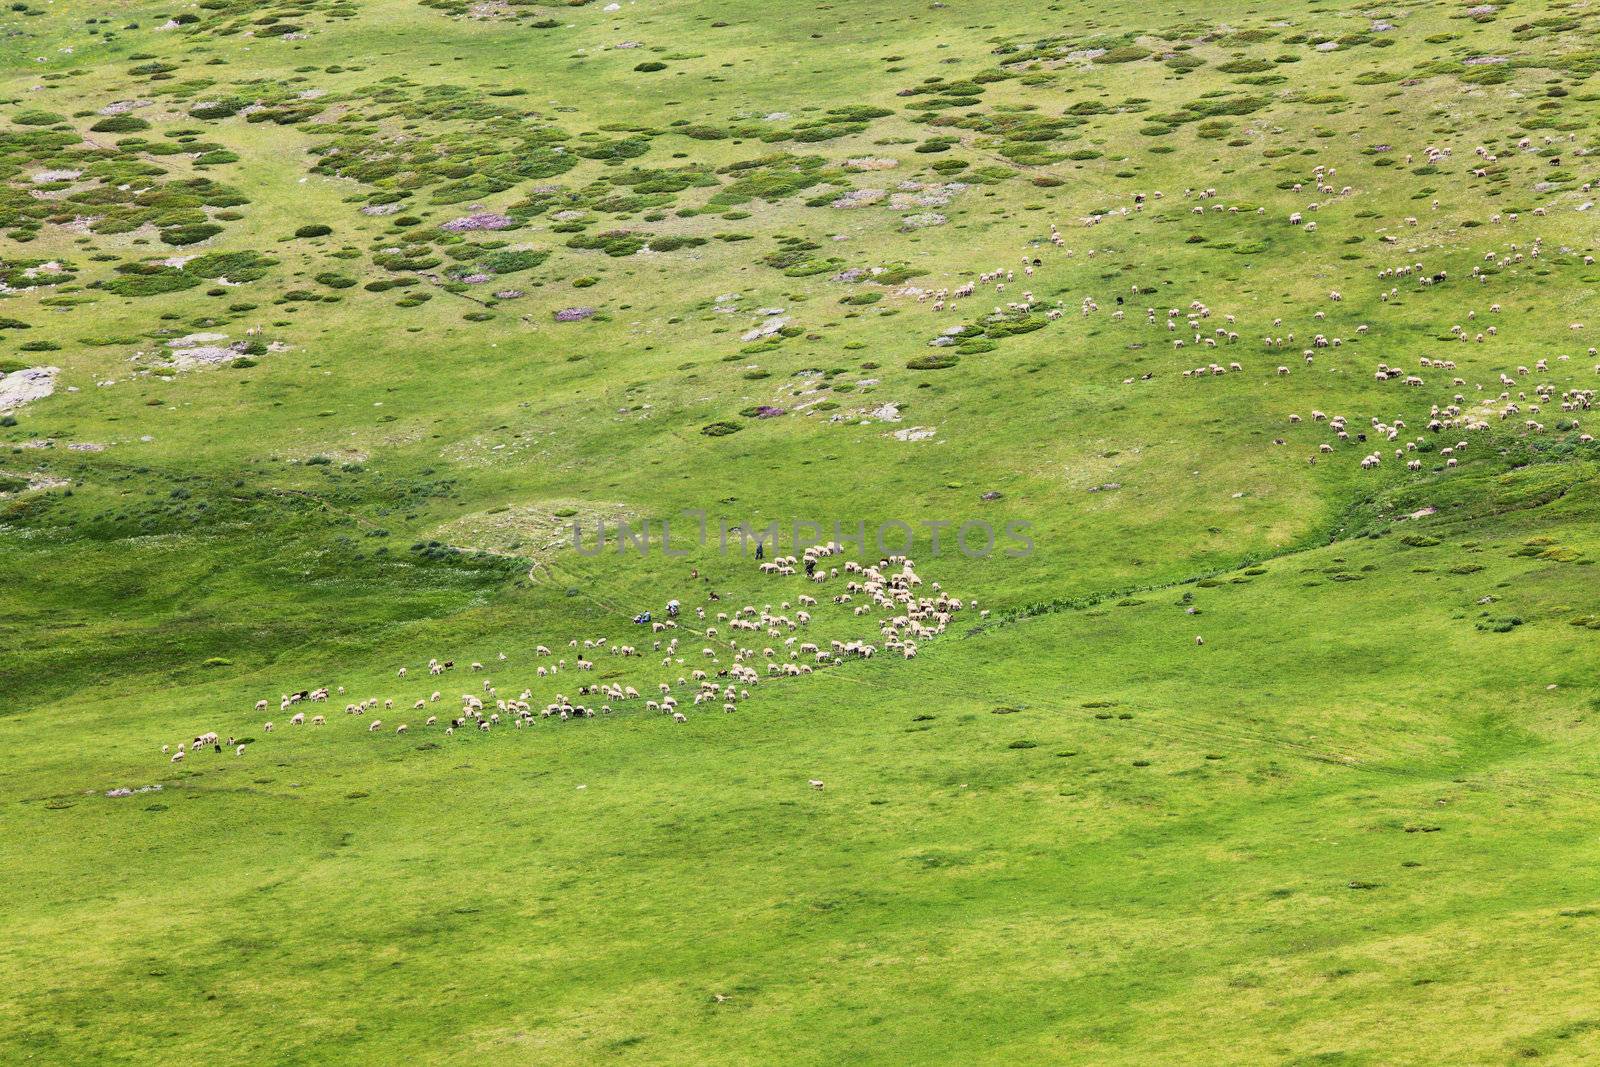 herds of sheep on a meadow in the mountains